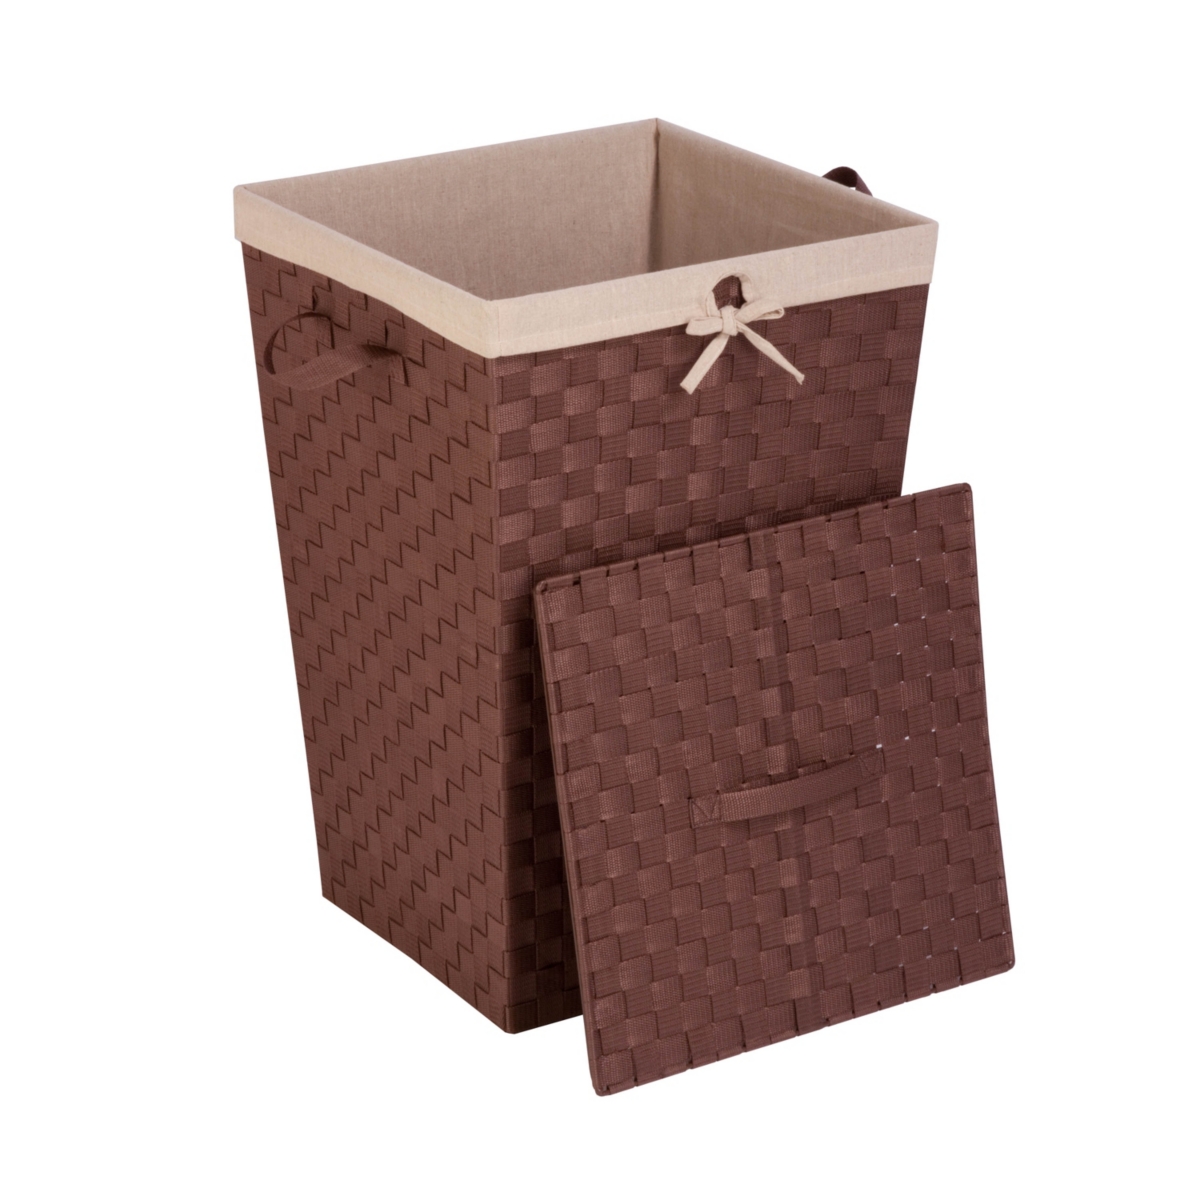 Decorative Woven Hamper with Lid - Brown